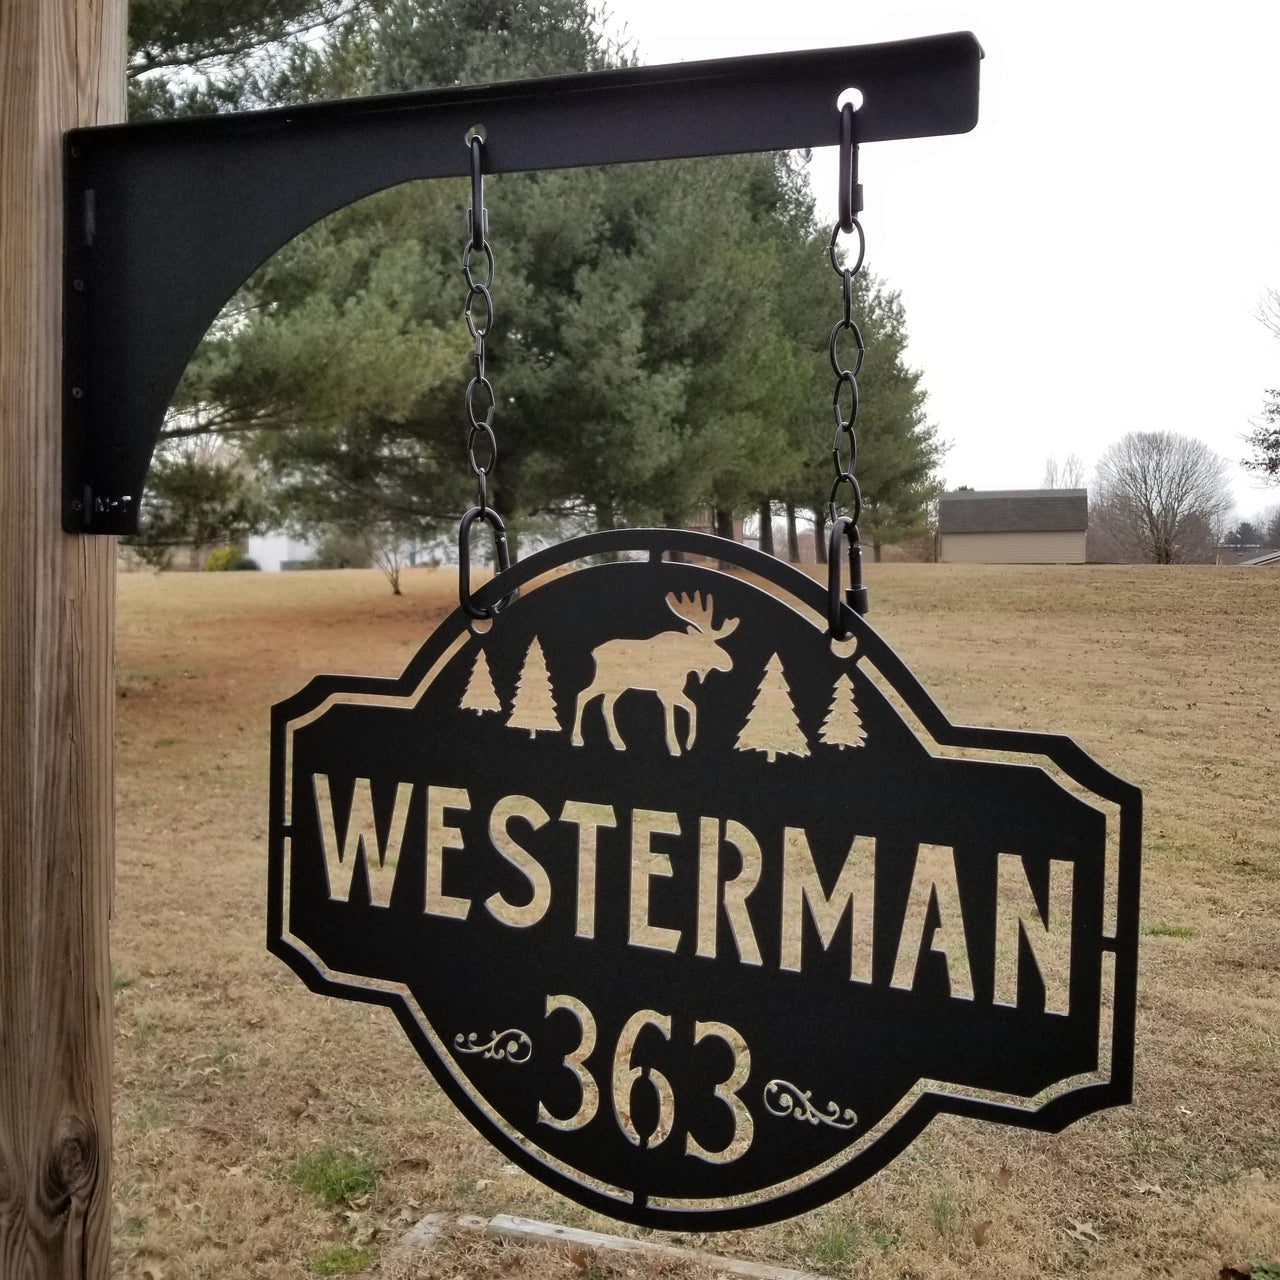 This is a personalized metal address sign that hangs from a hanging bracket mounted to a wooden post.  The sign is powder coated black and features a forest scene with a moose in the center. The sign reads, "Westerman 363".